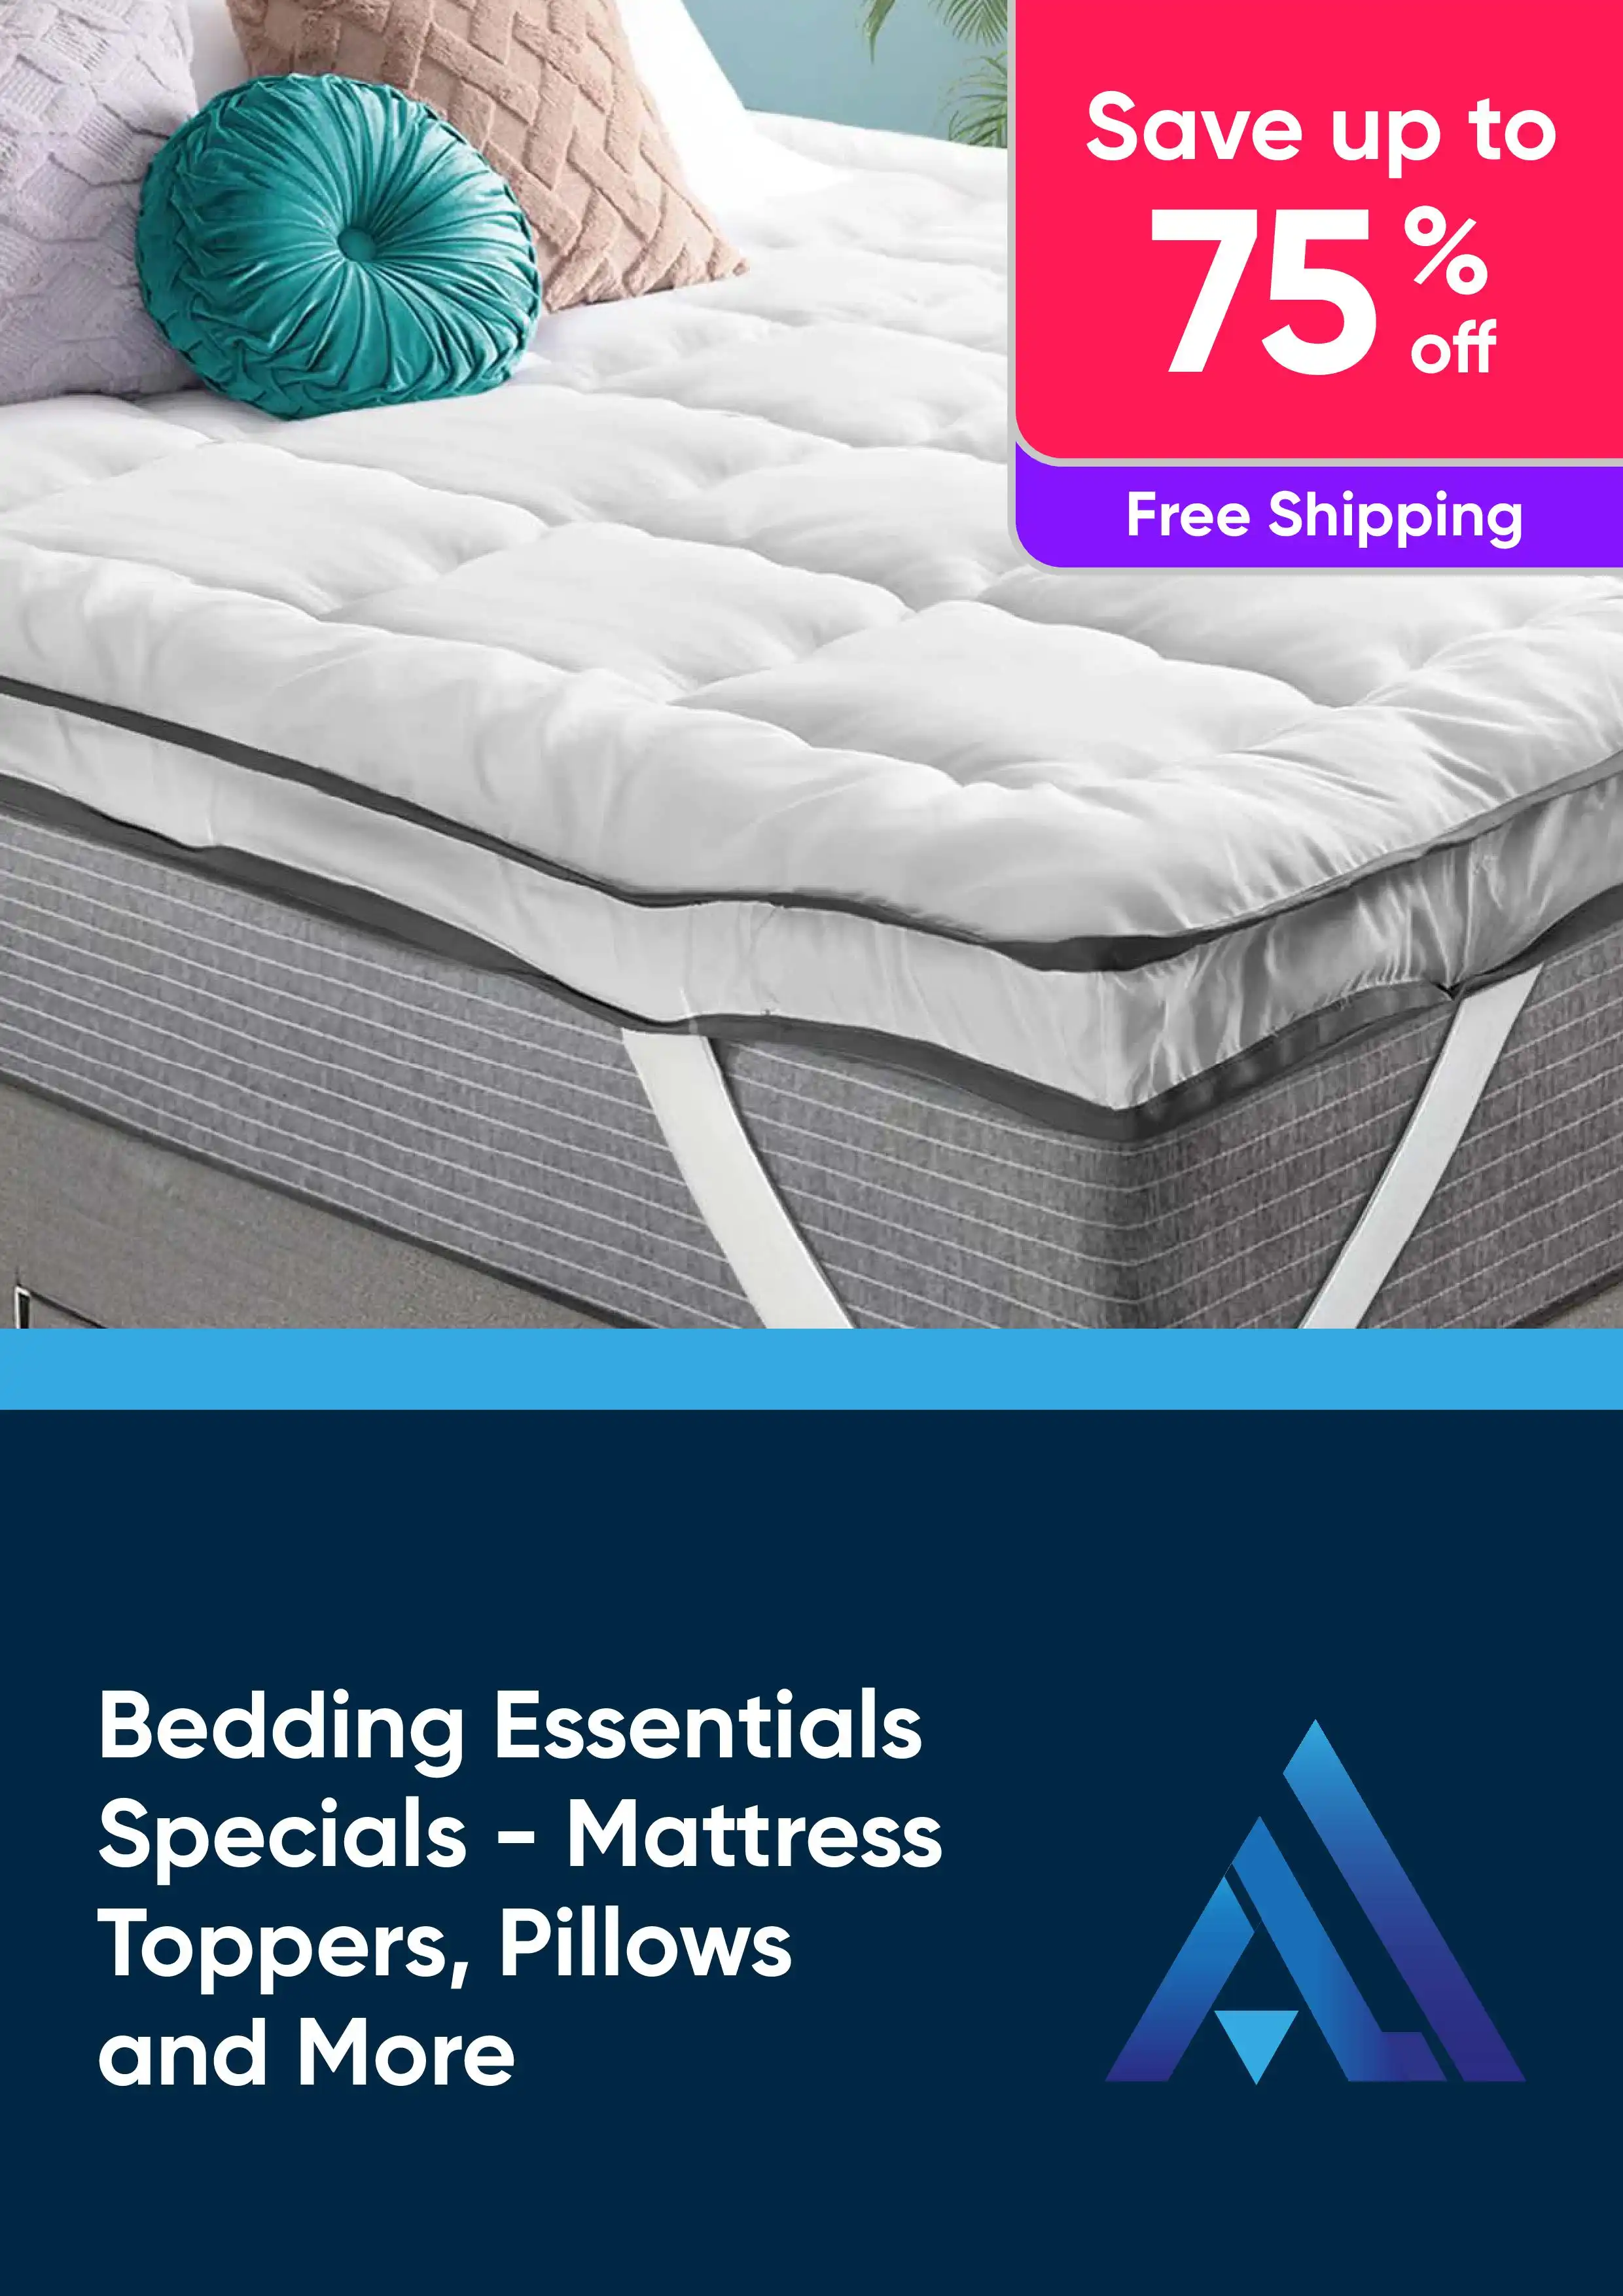 Bedding Essentials Specials - Save Up to 75% Off Mattress Toppers, Pillows and More